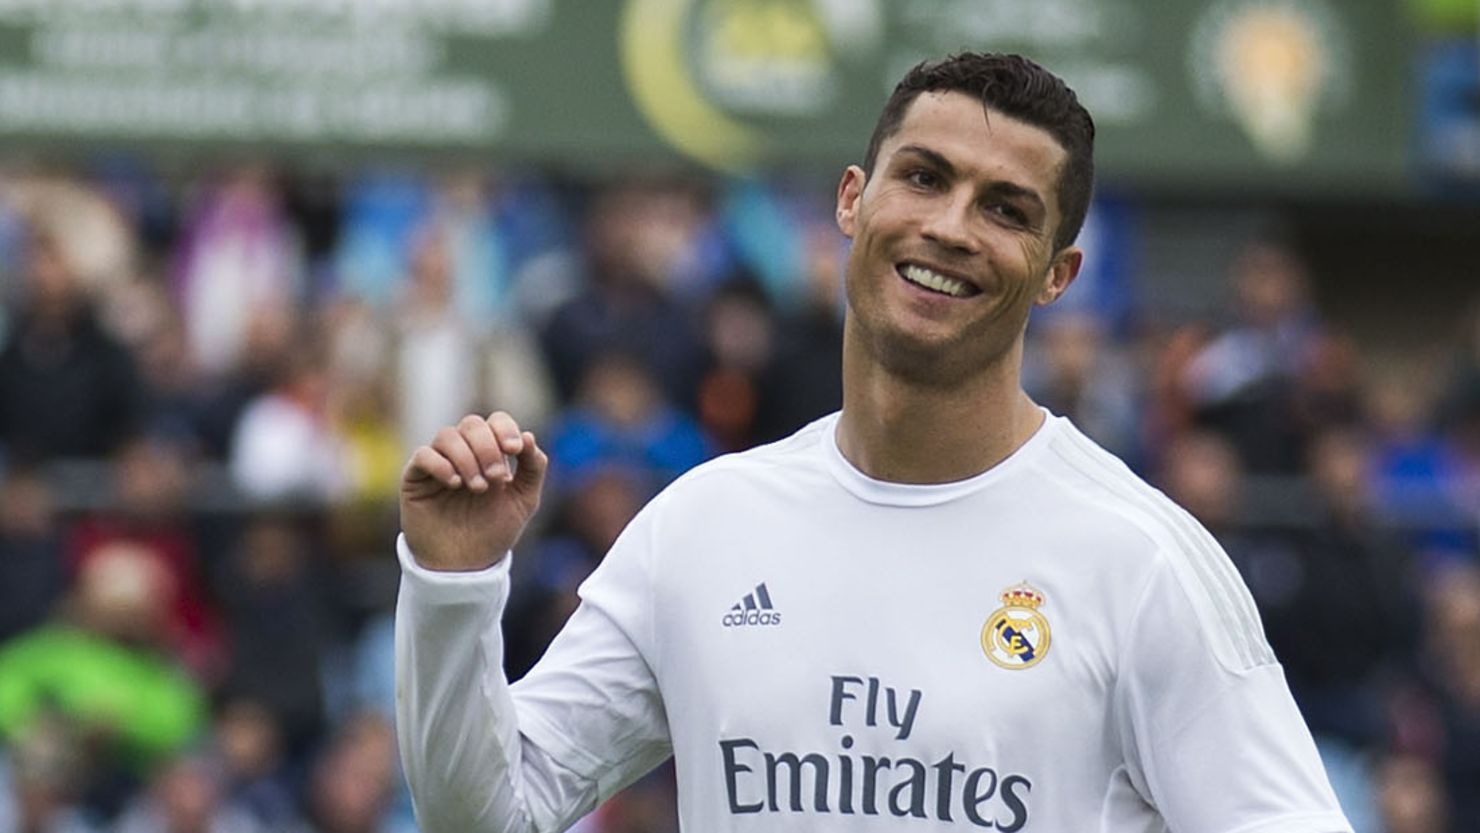 Cristiano Ronaldo celebrates scoring his team's fifth and final goal in the thumping win at Getafe.